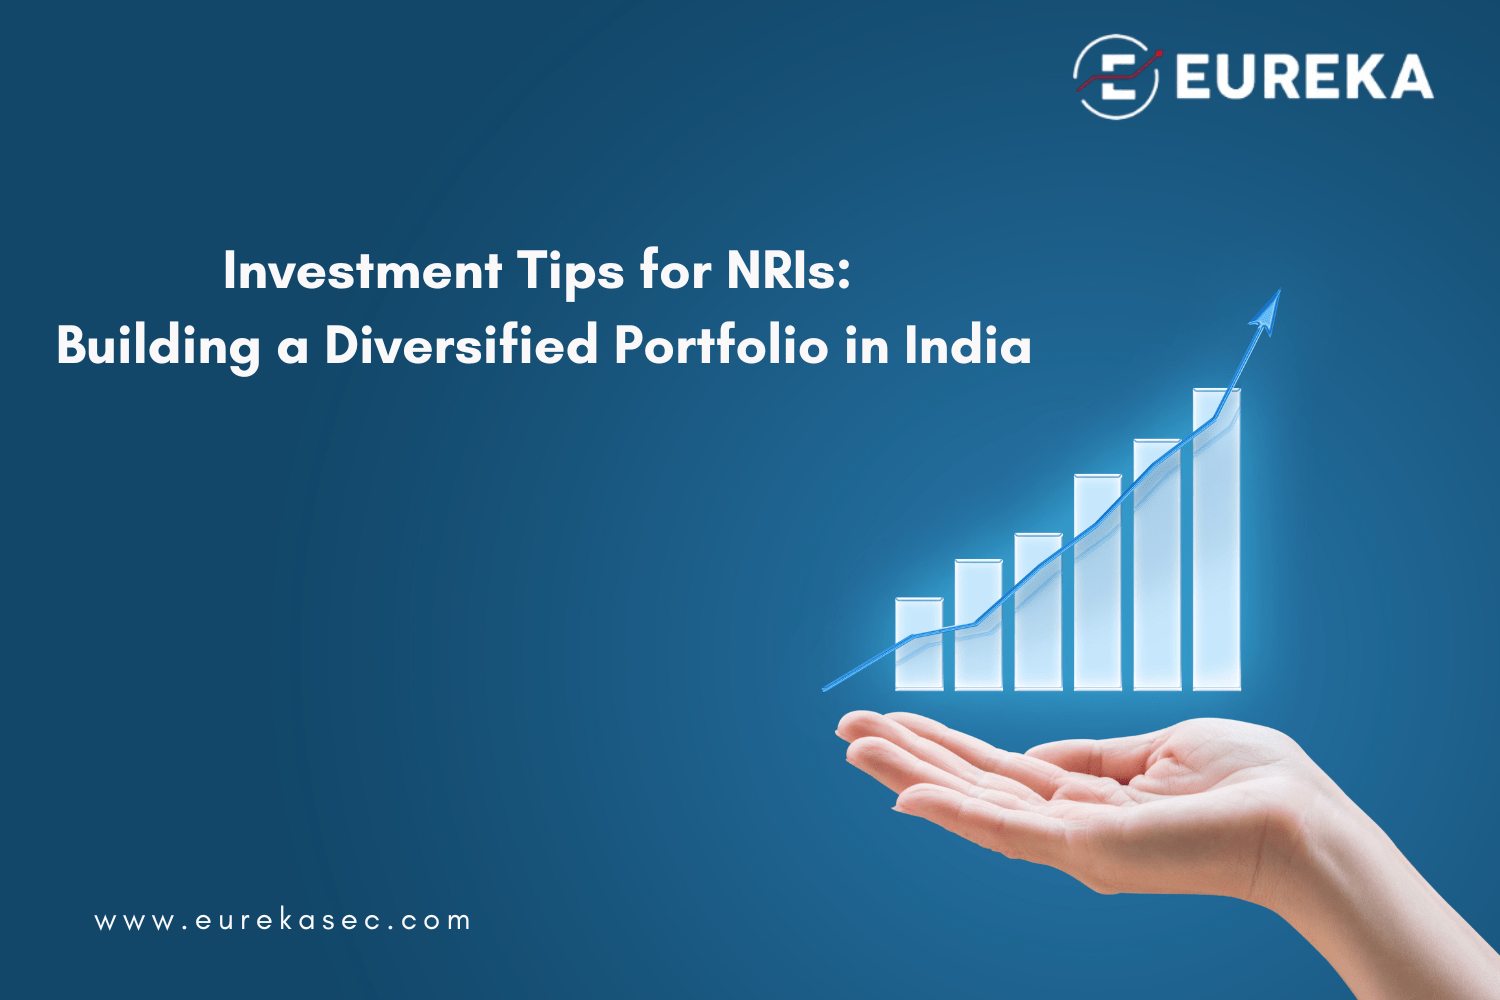 Investment Tips for NRIs: Building a Diversified Portfolio in India